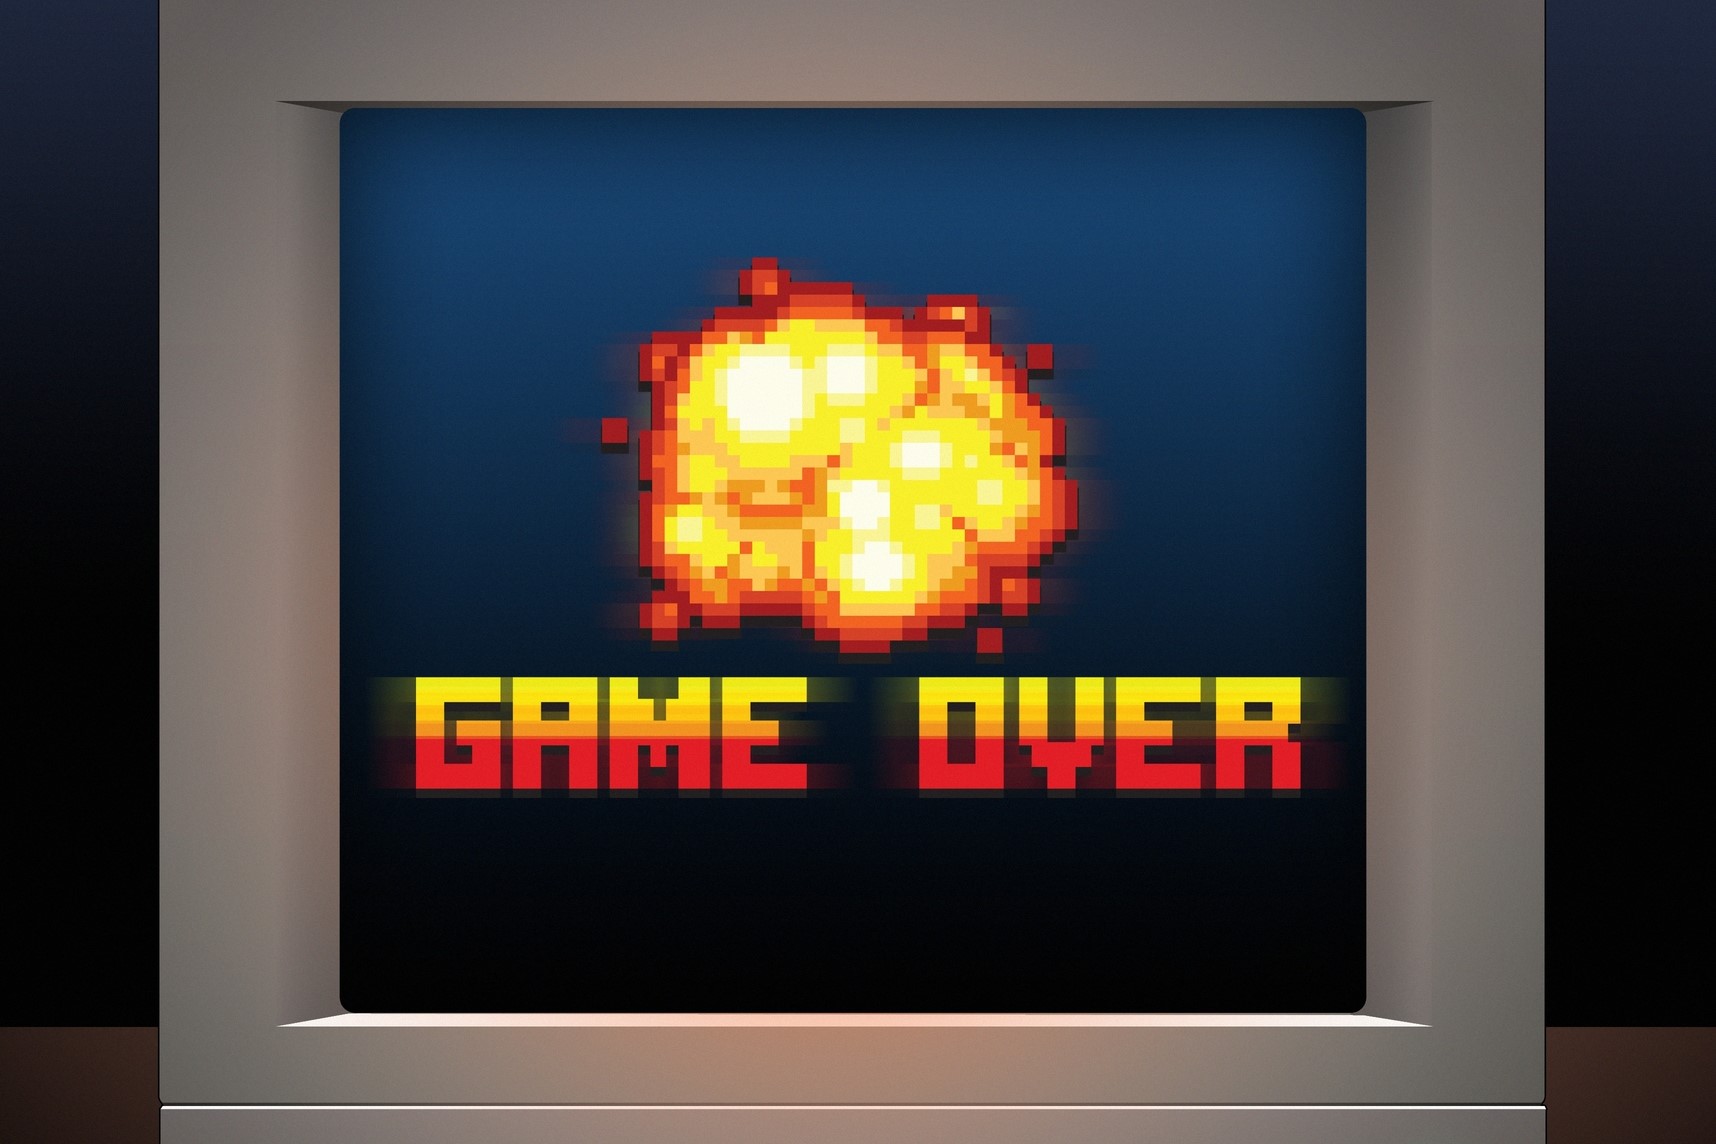 image of "Game Over" screen displayed on monitor